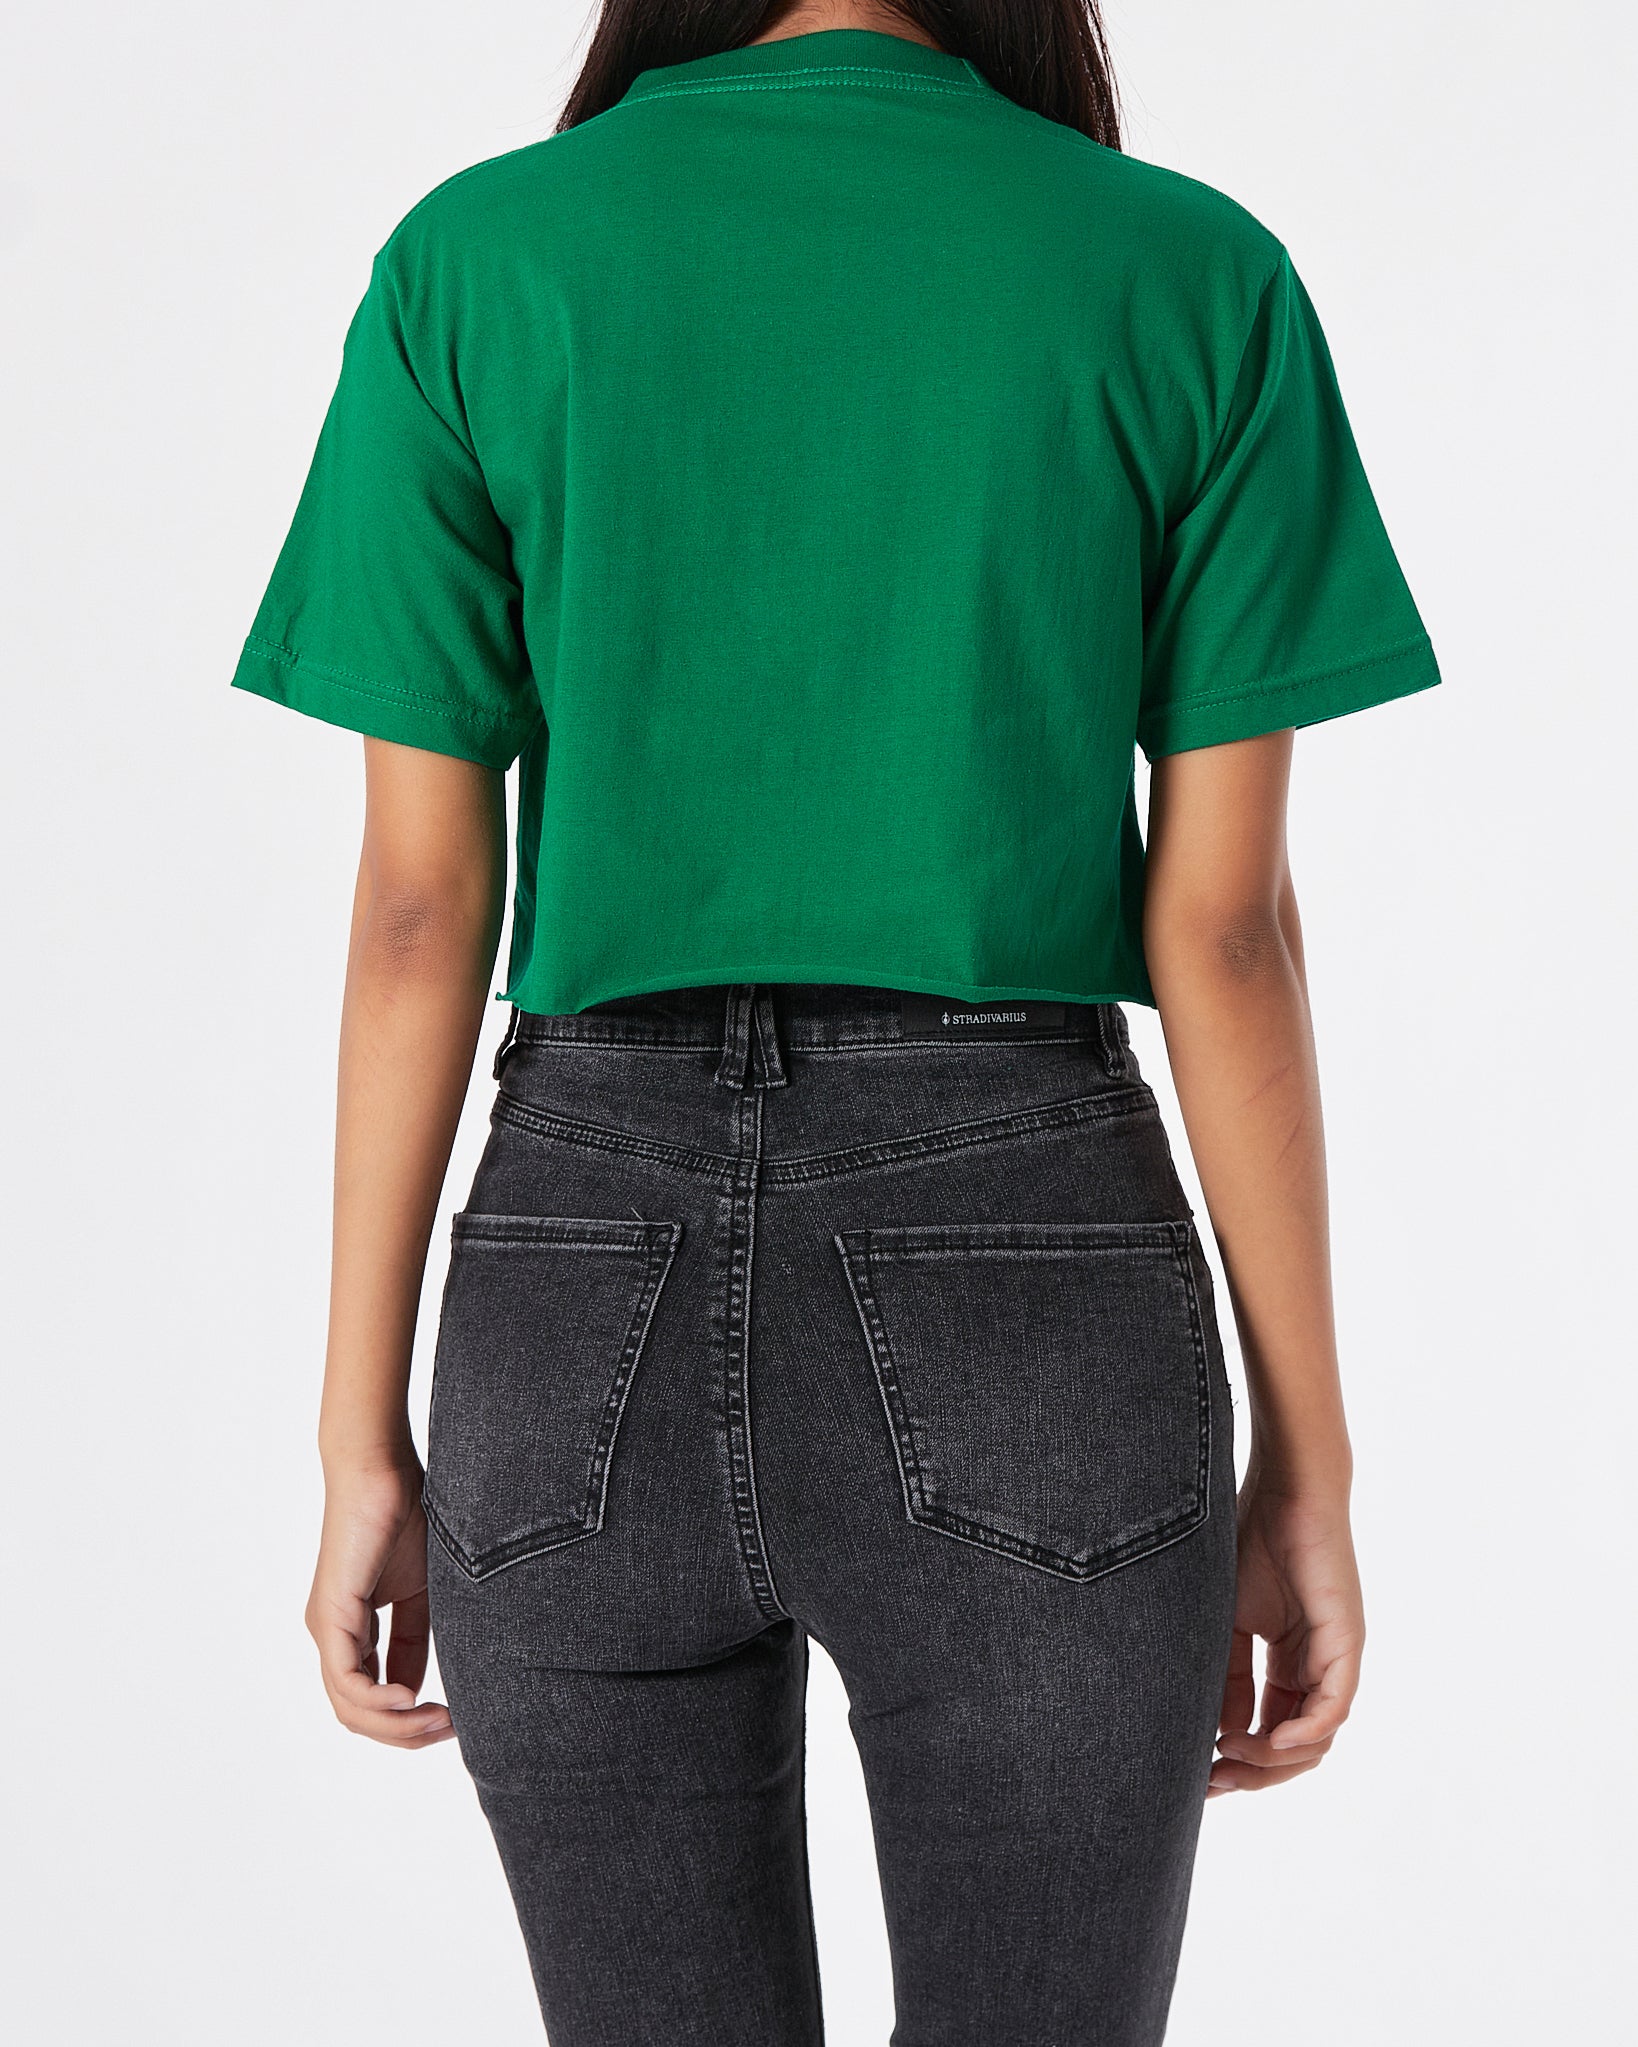 Sunday Forever Lady Green T-Shirt Crop Top 9.90